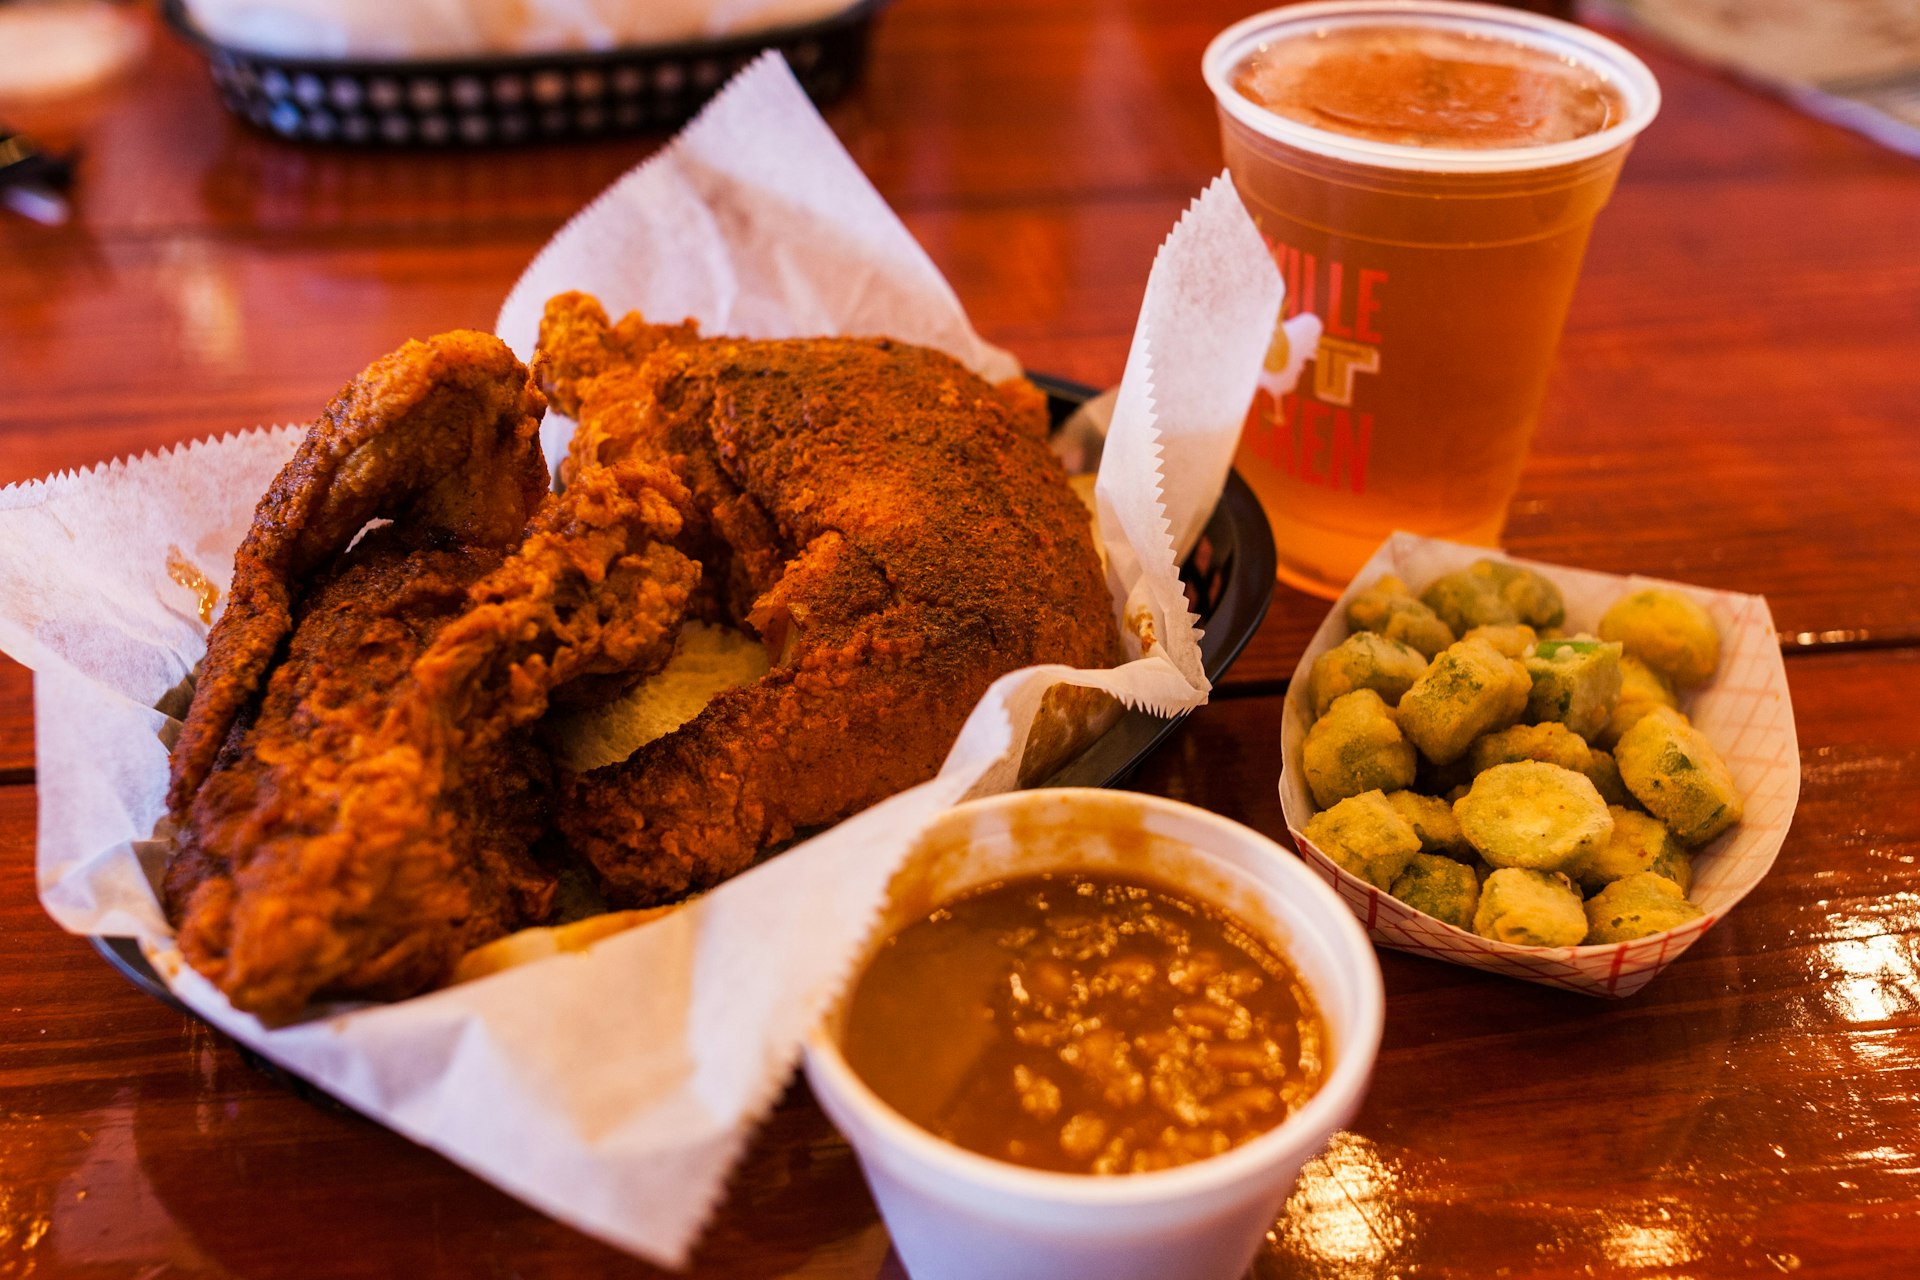 Hot chicken from Pepperfire. Image by Alexander Howard / Lonely Planet